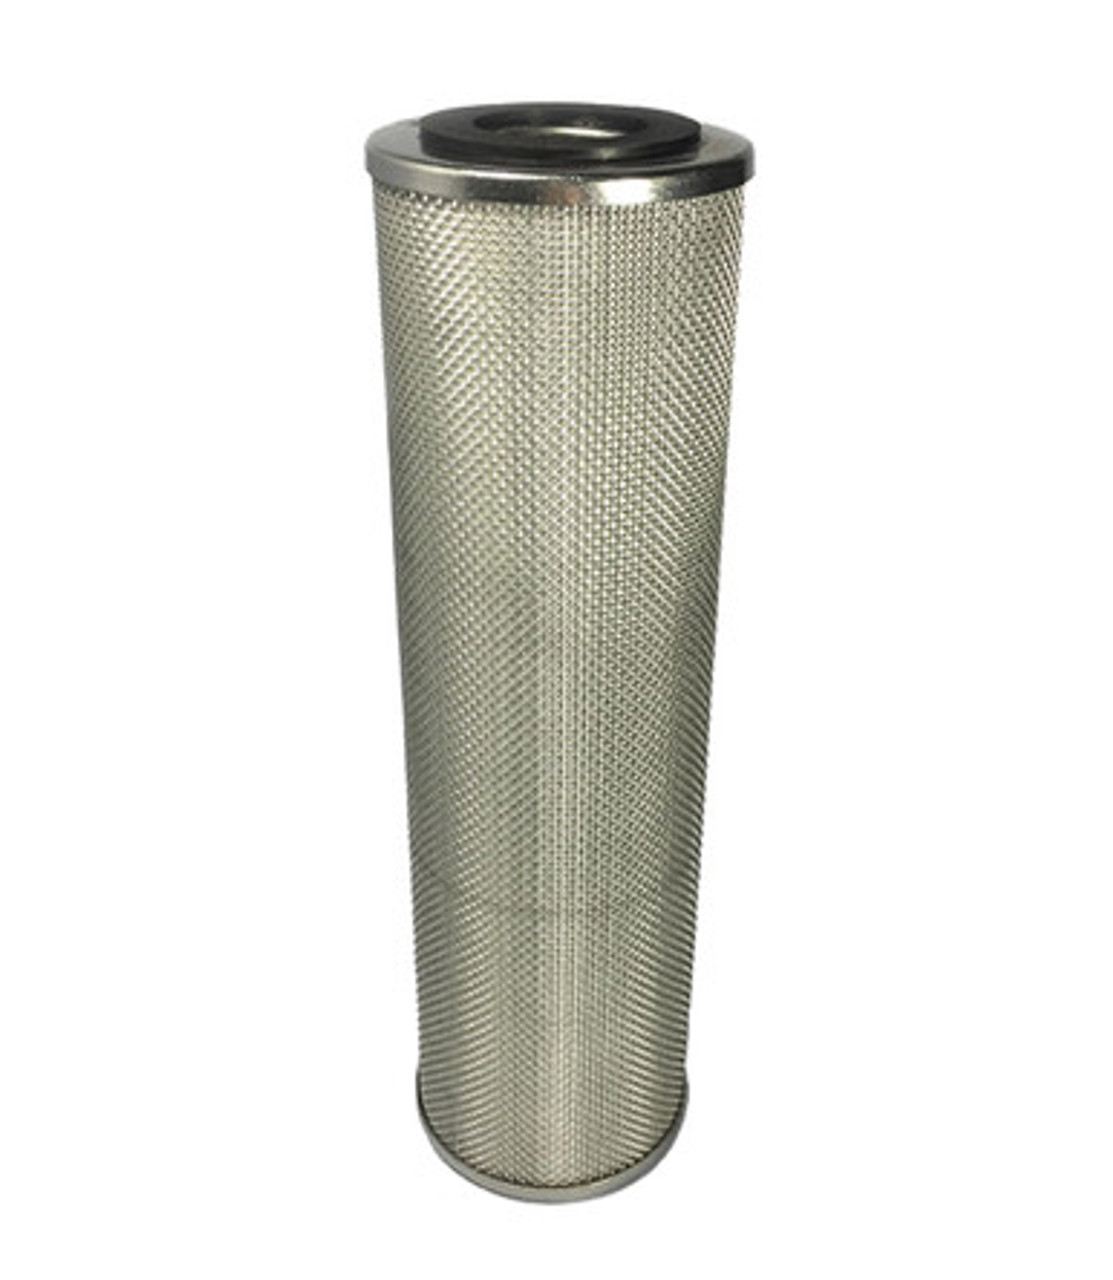 9.5" Replacement Element Filter